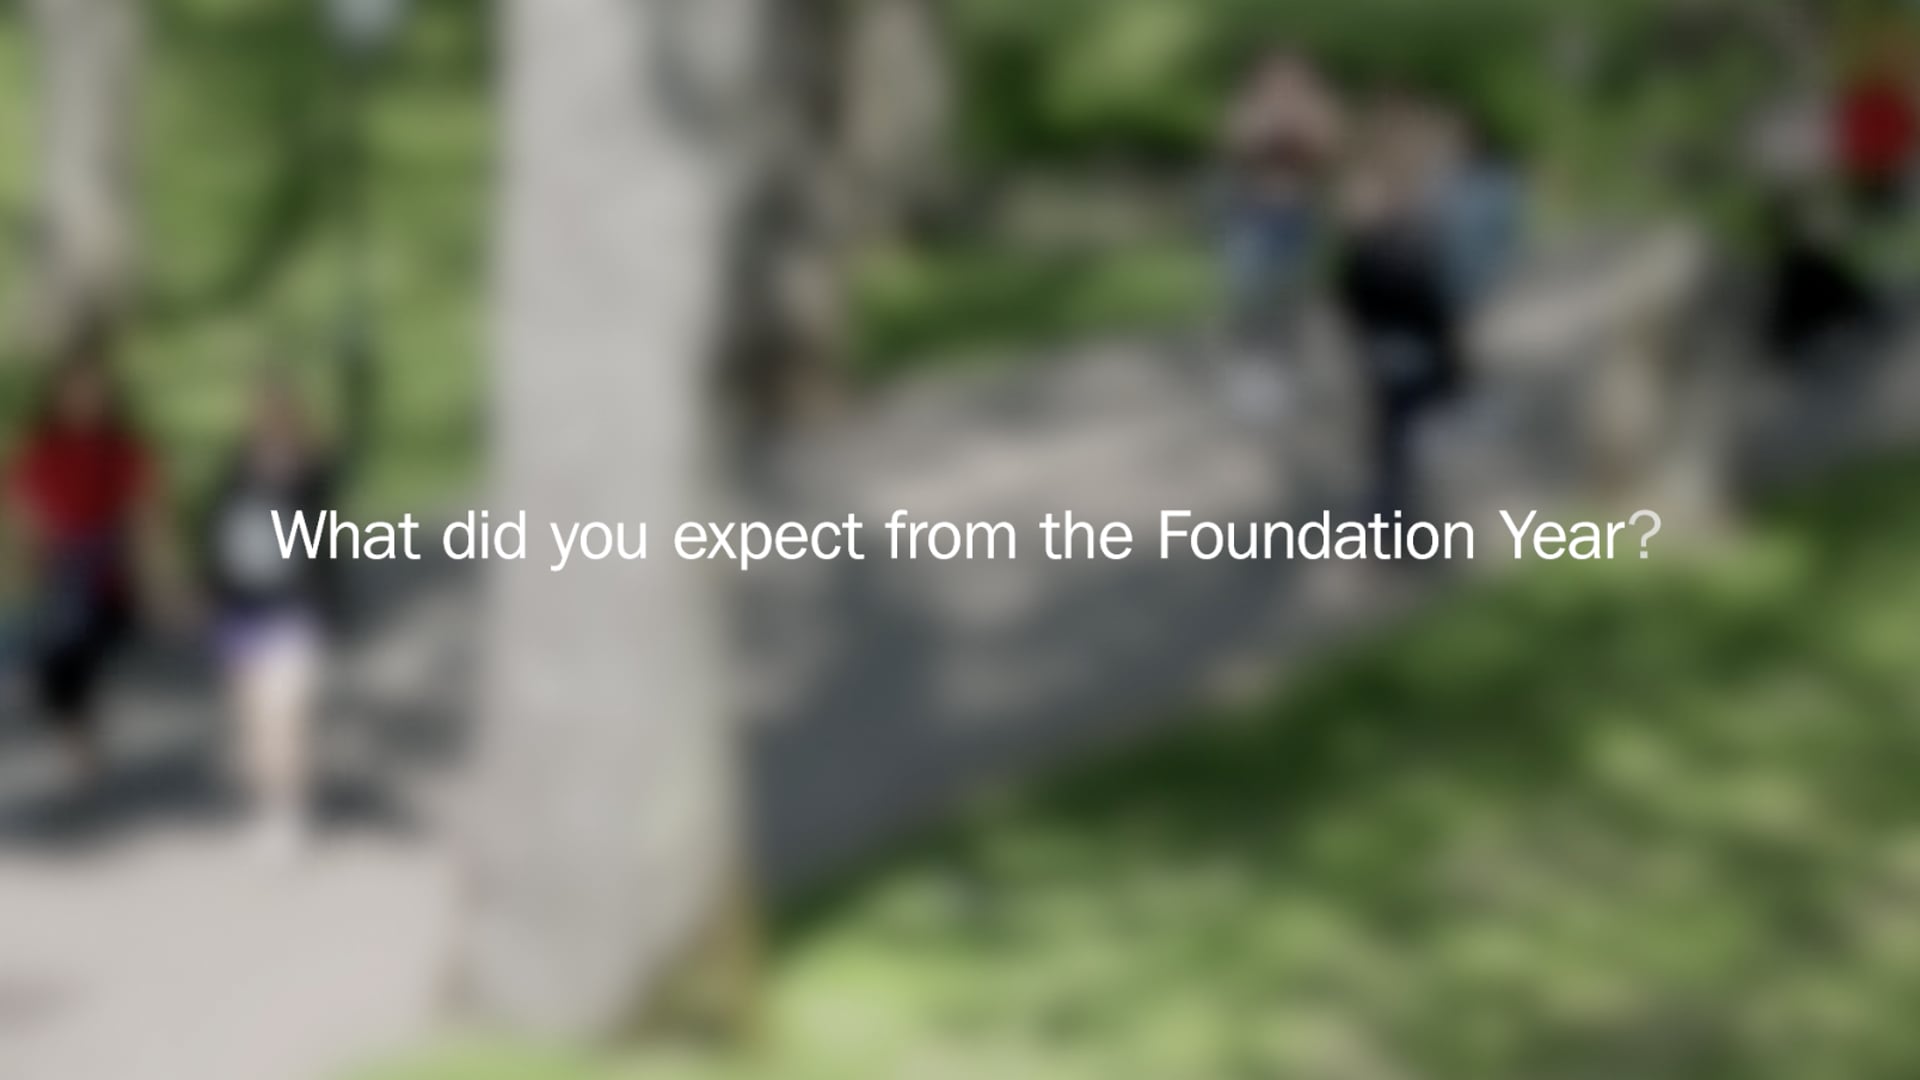 What did you expect from the Foundation Year?